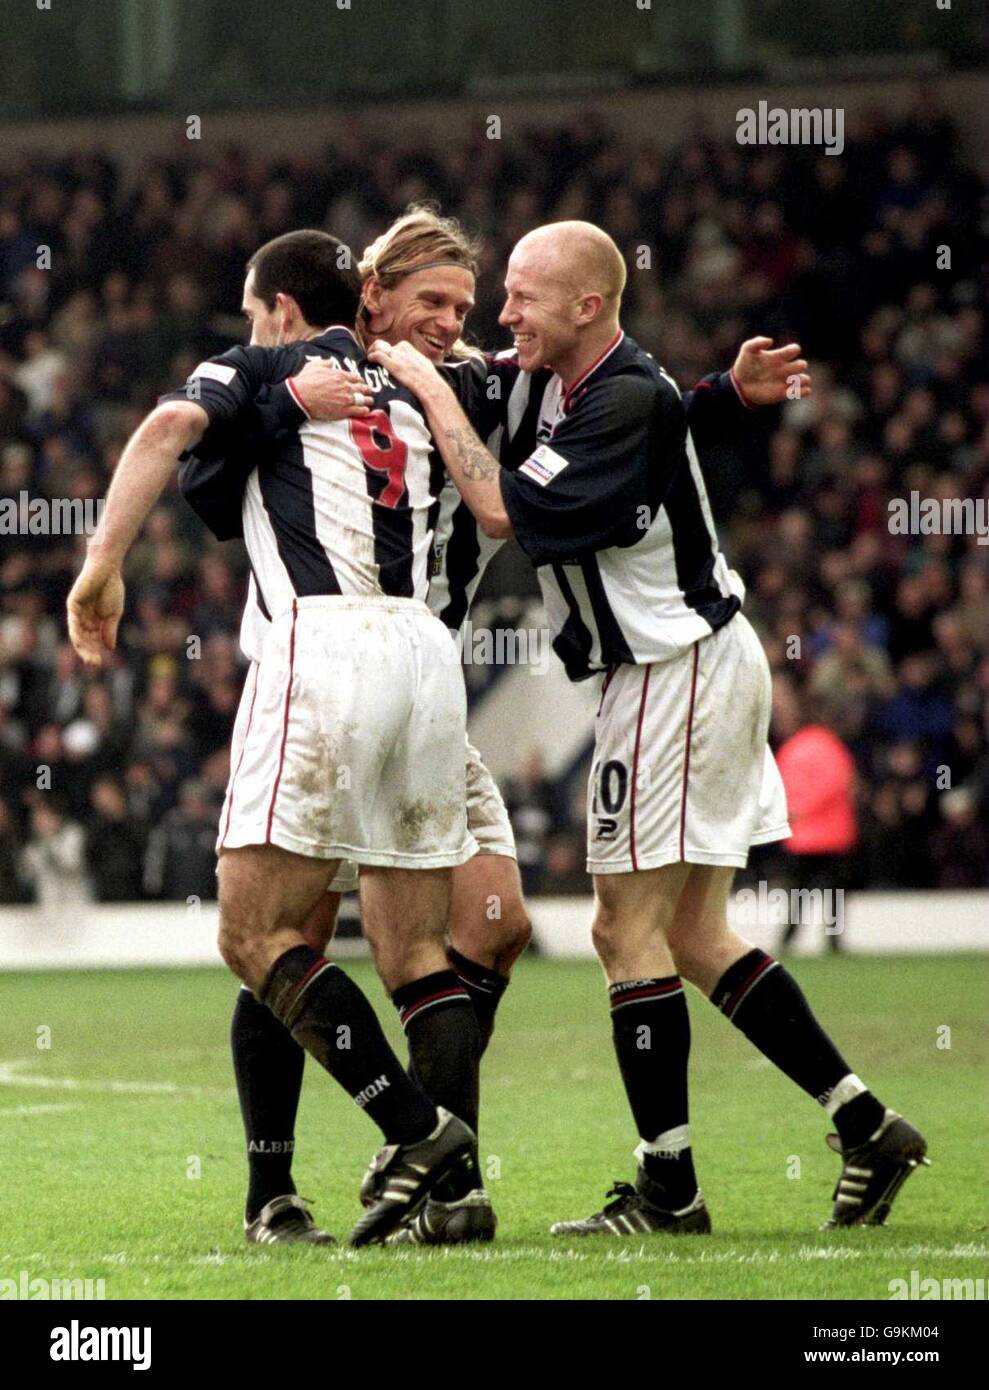 (L-R) West Bromwich Albion's Bob Taylor celebrates scoring the opening goal with teammates Richard Sneekes and Lee Hughes Stock Photo